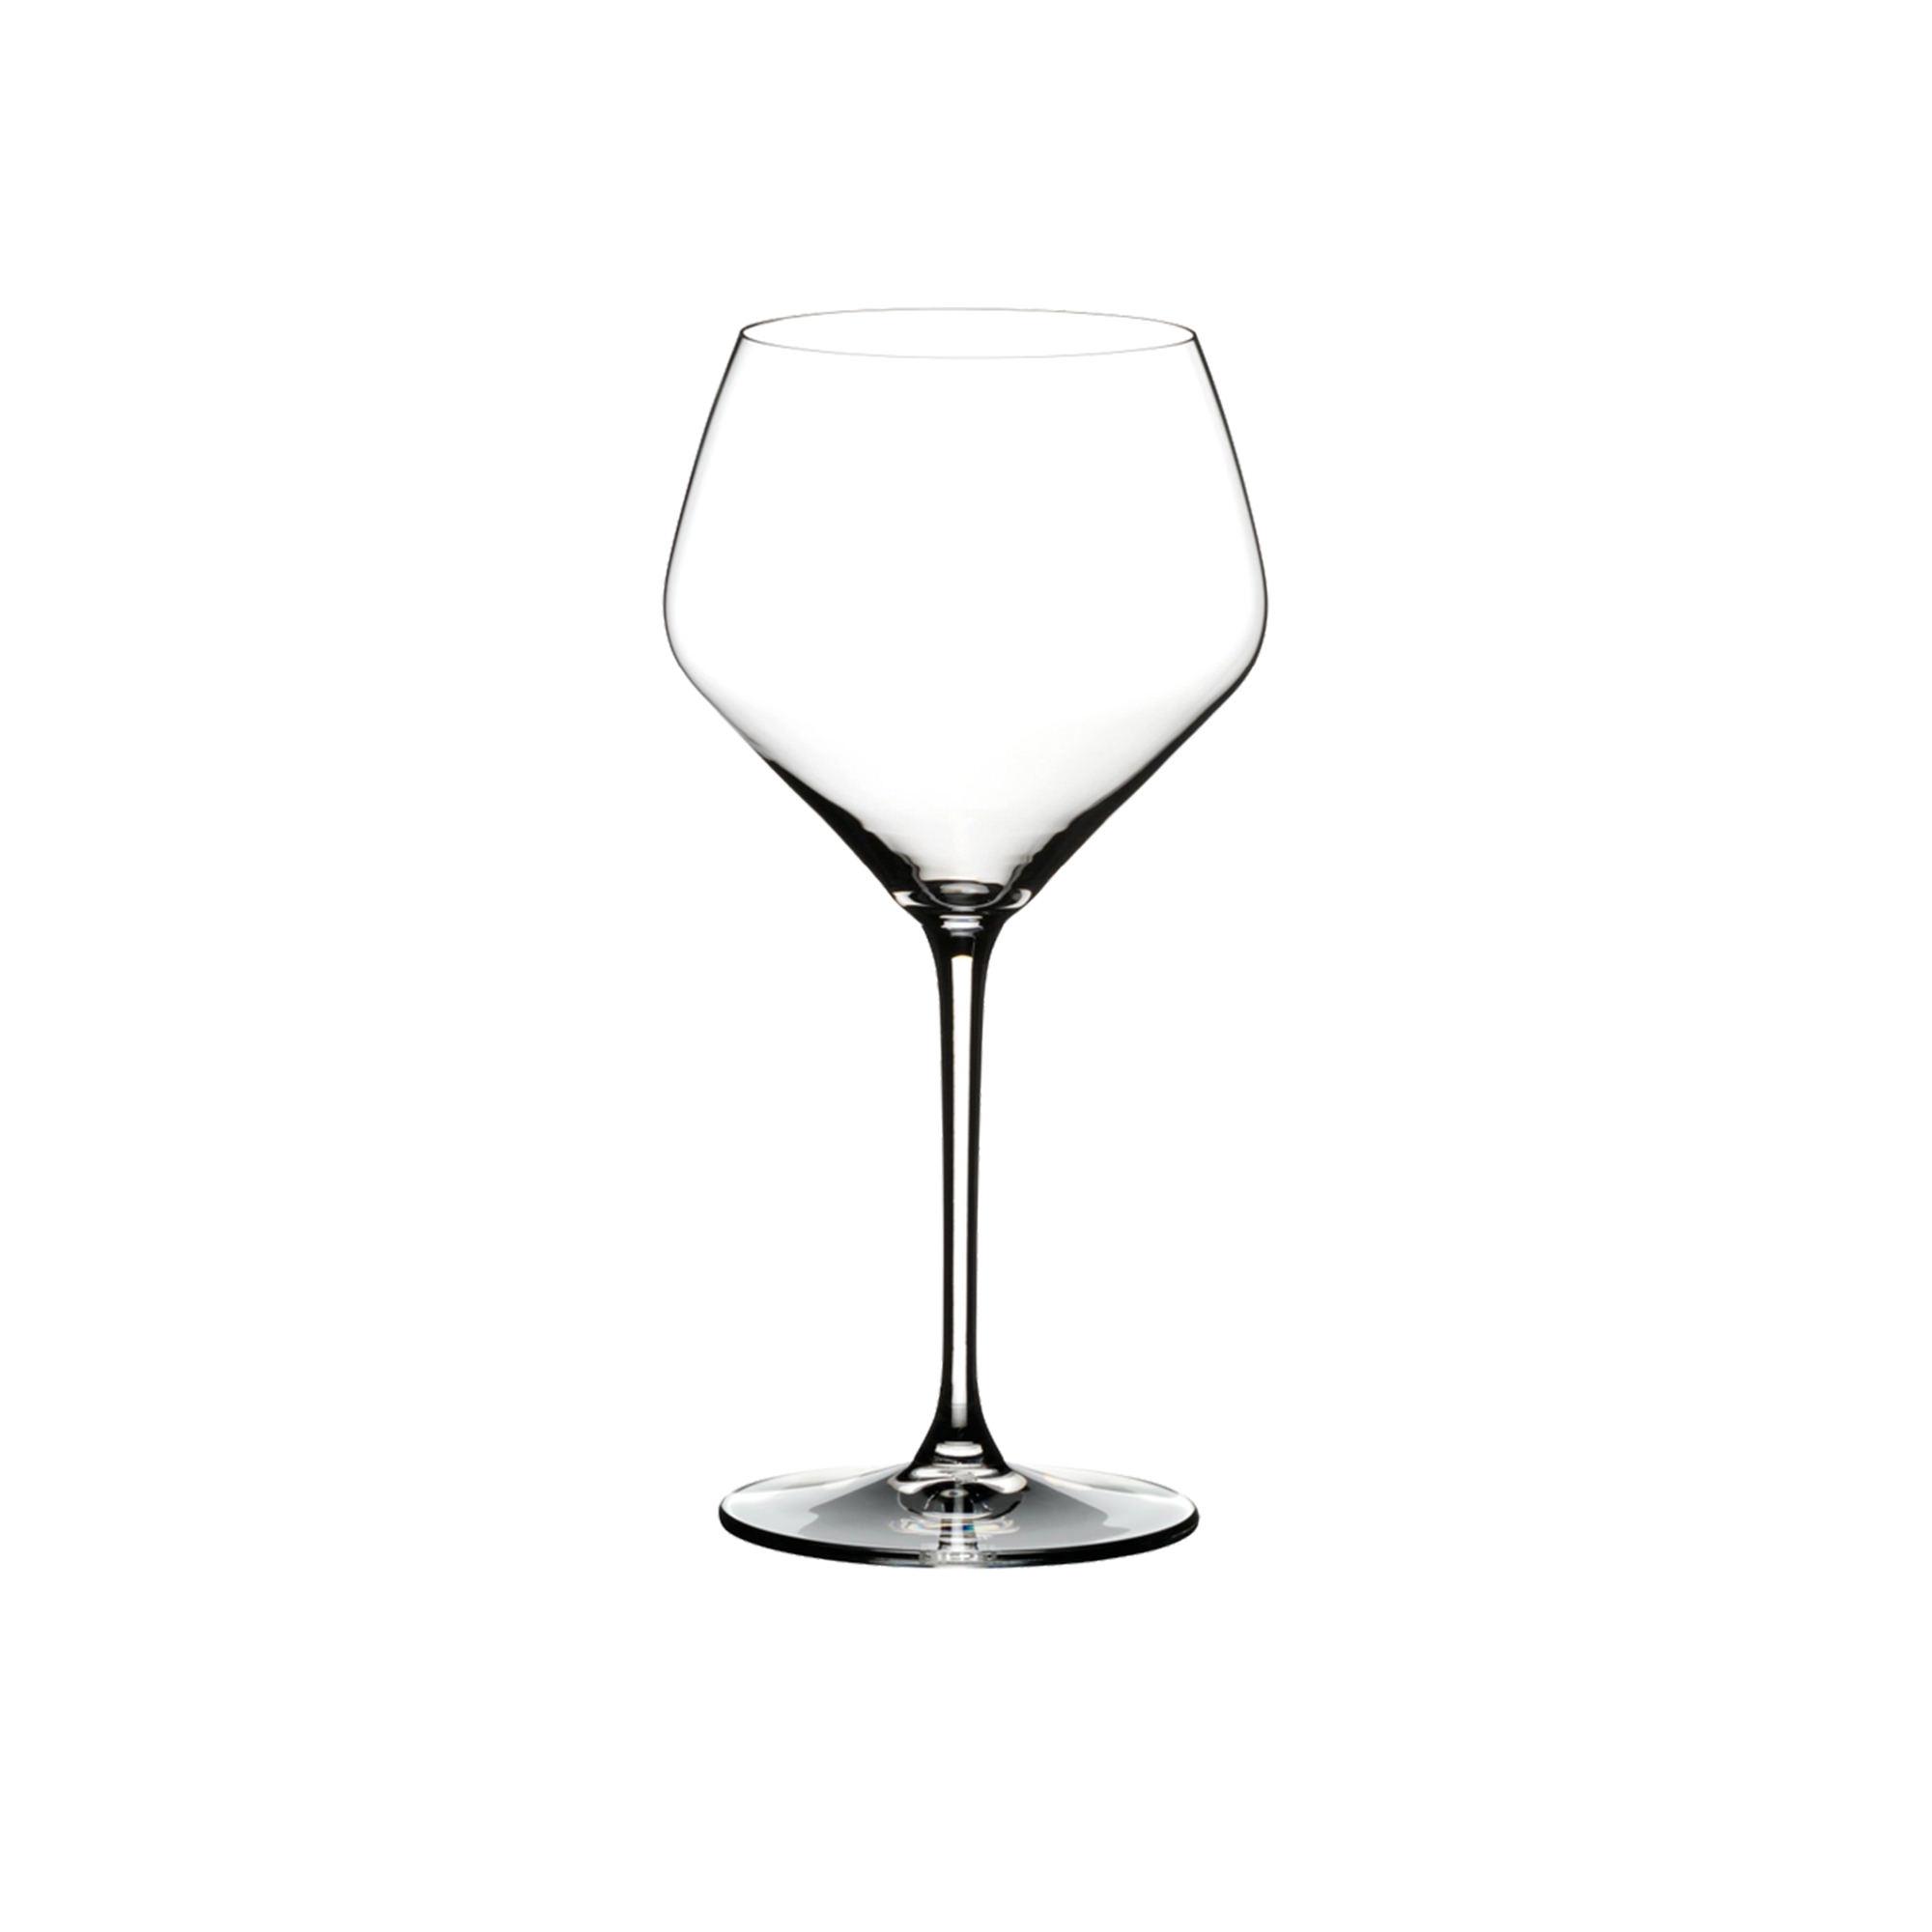 Riedel Extreme Oaked Chardonnay Glass 670ml Set of 2 Image 3